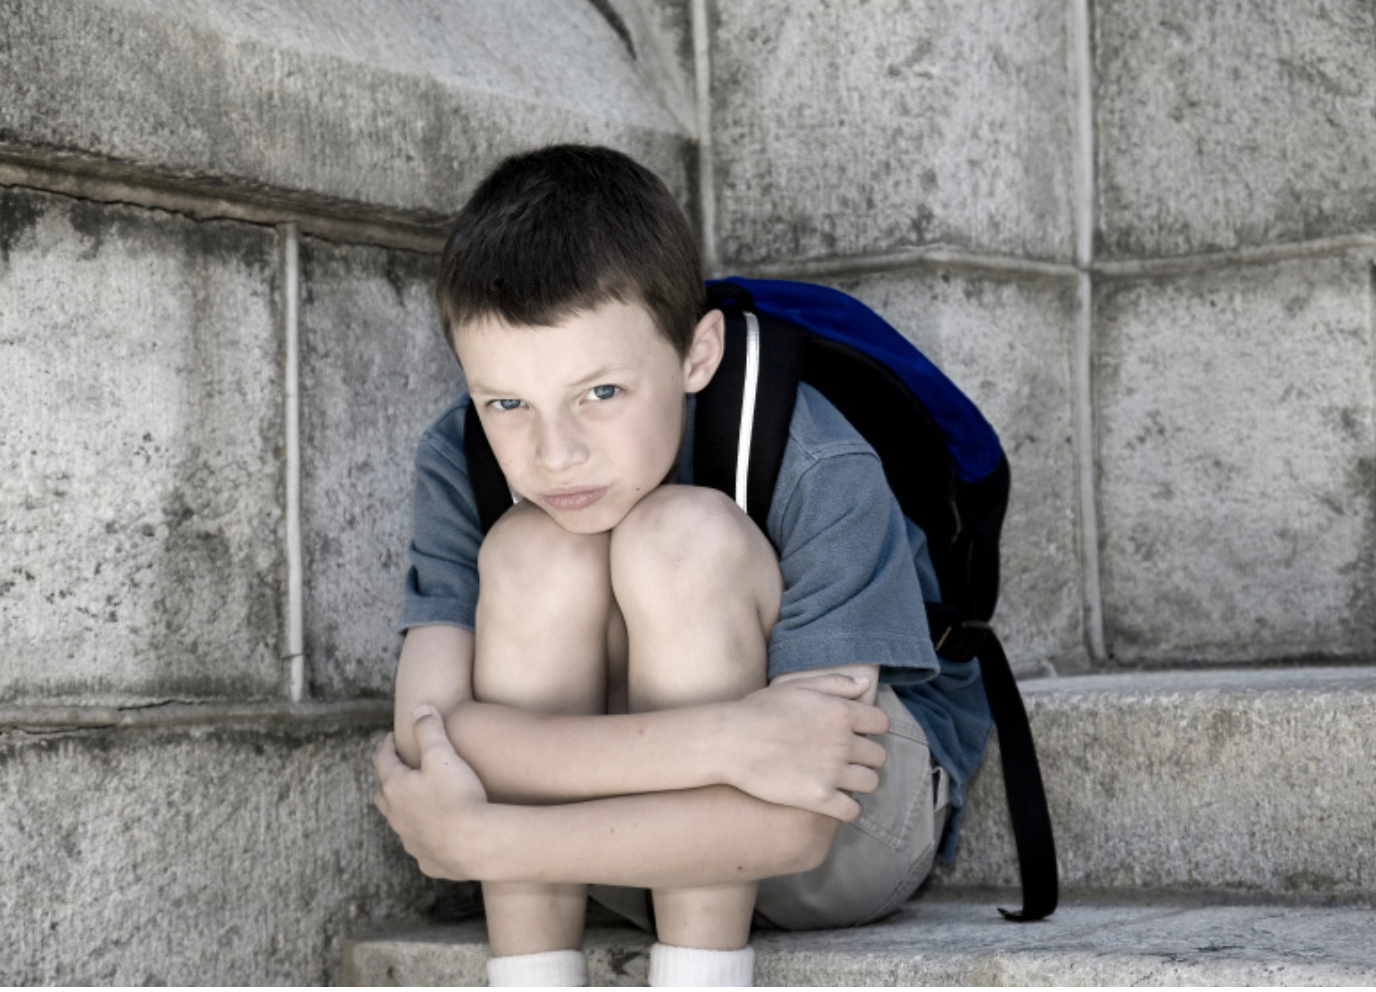 Short Cognitive Behavioral Therapy Program Found Effective in Anxiety Disorders Among Children